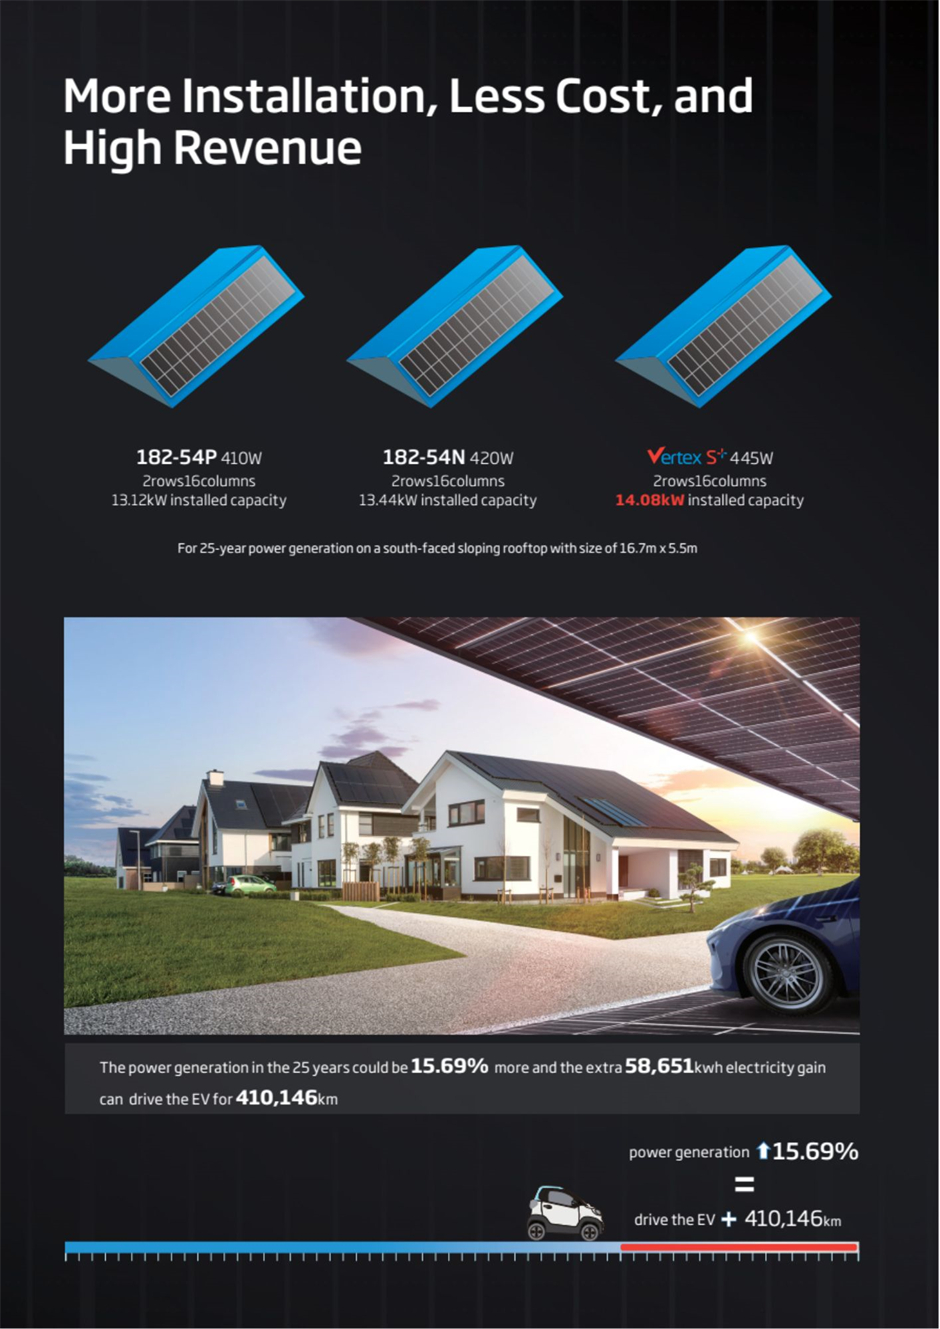 On the same roof, Vertex S+ Clear Black solar module delivers higher installation capacity with less cost and higher revenue.